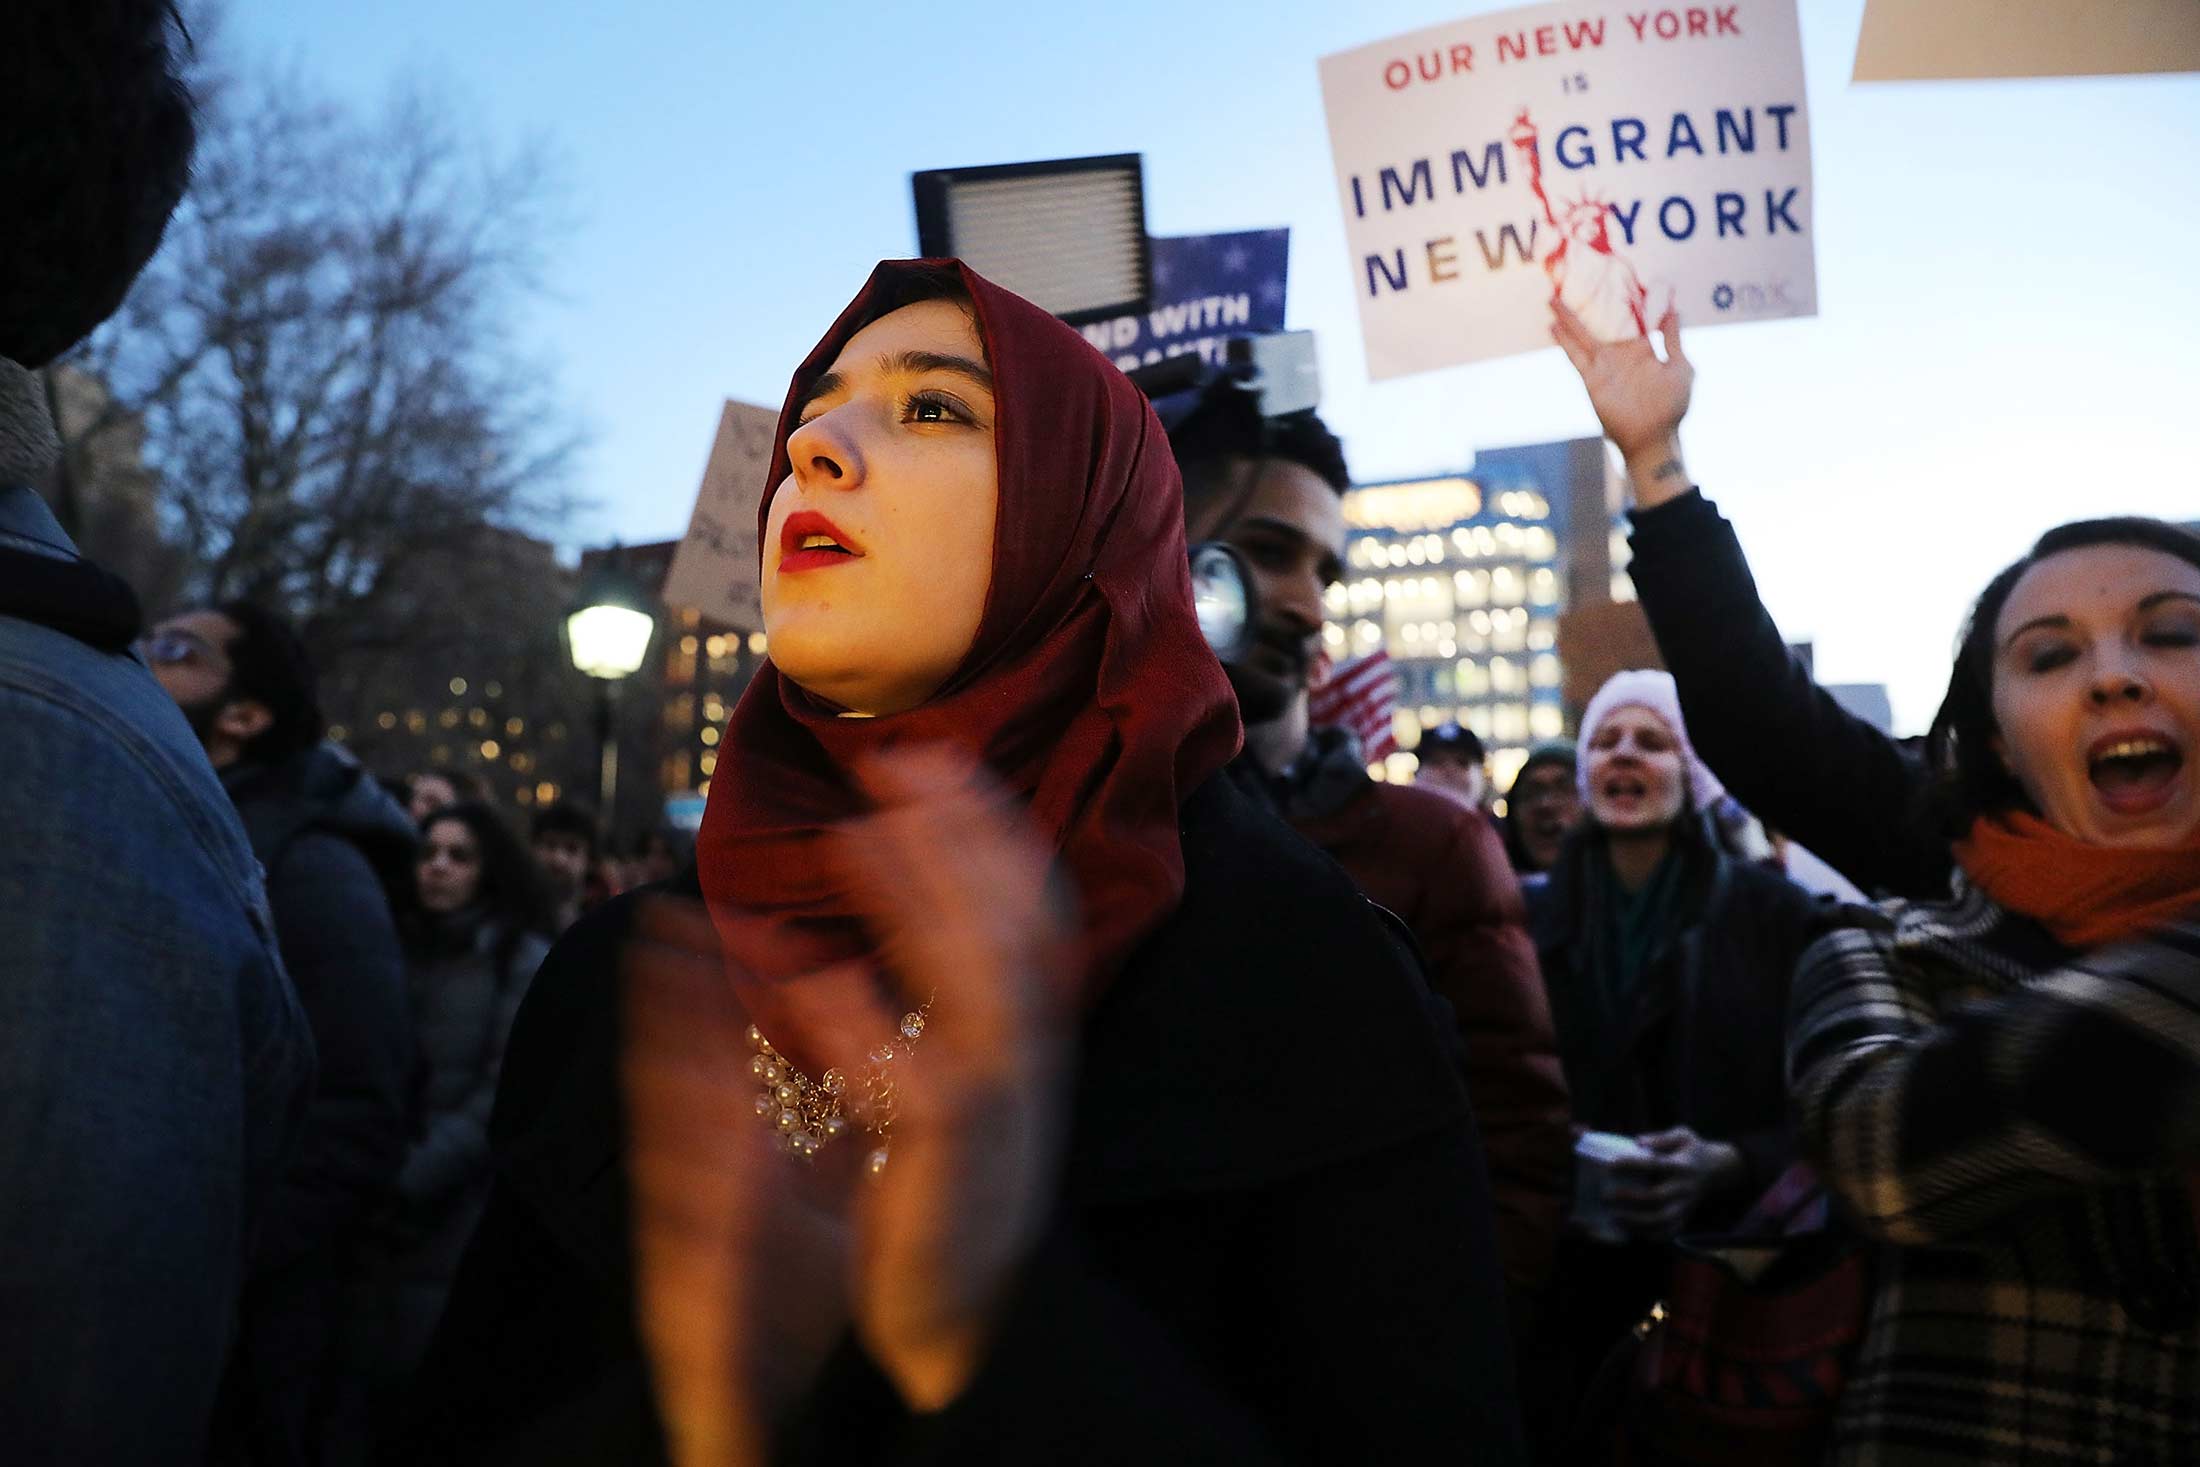 Hundreds of people attend an evening rally at Washington Square Park in New York in support of Muslims, immigrants and against the building of a wall along the Mexican border.
